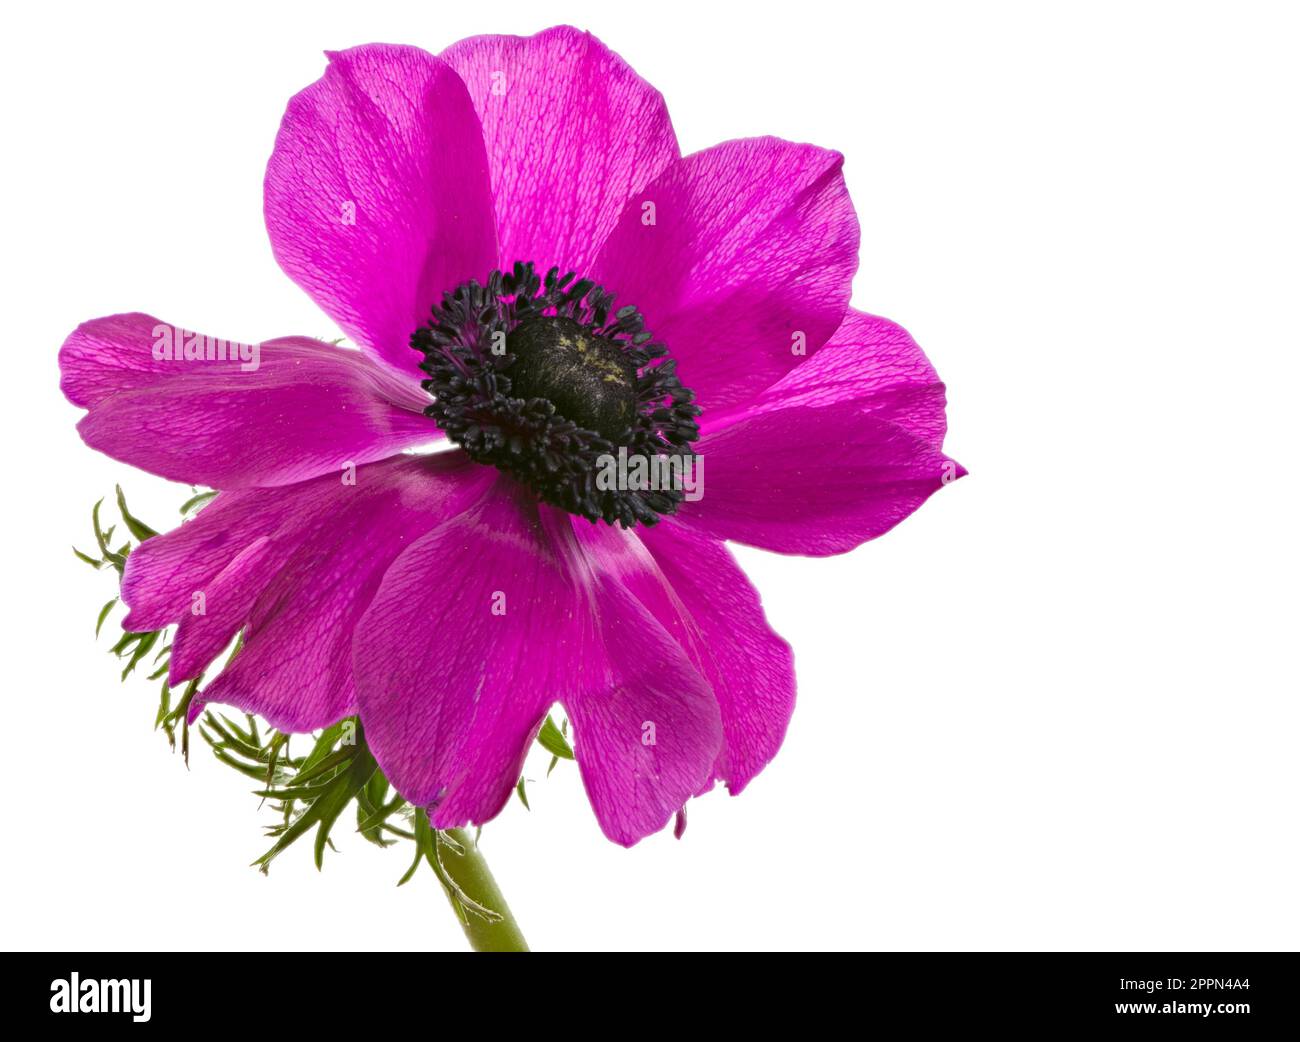 Macro of an isolated purple anemone flower blossom Stock Photo